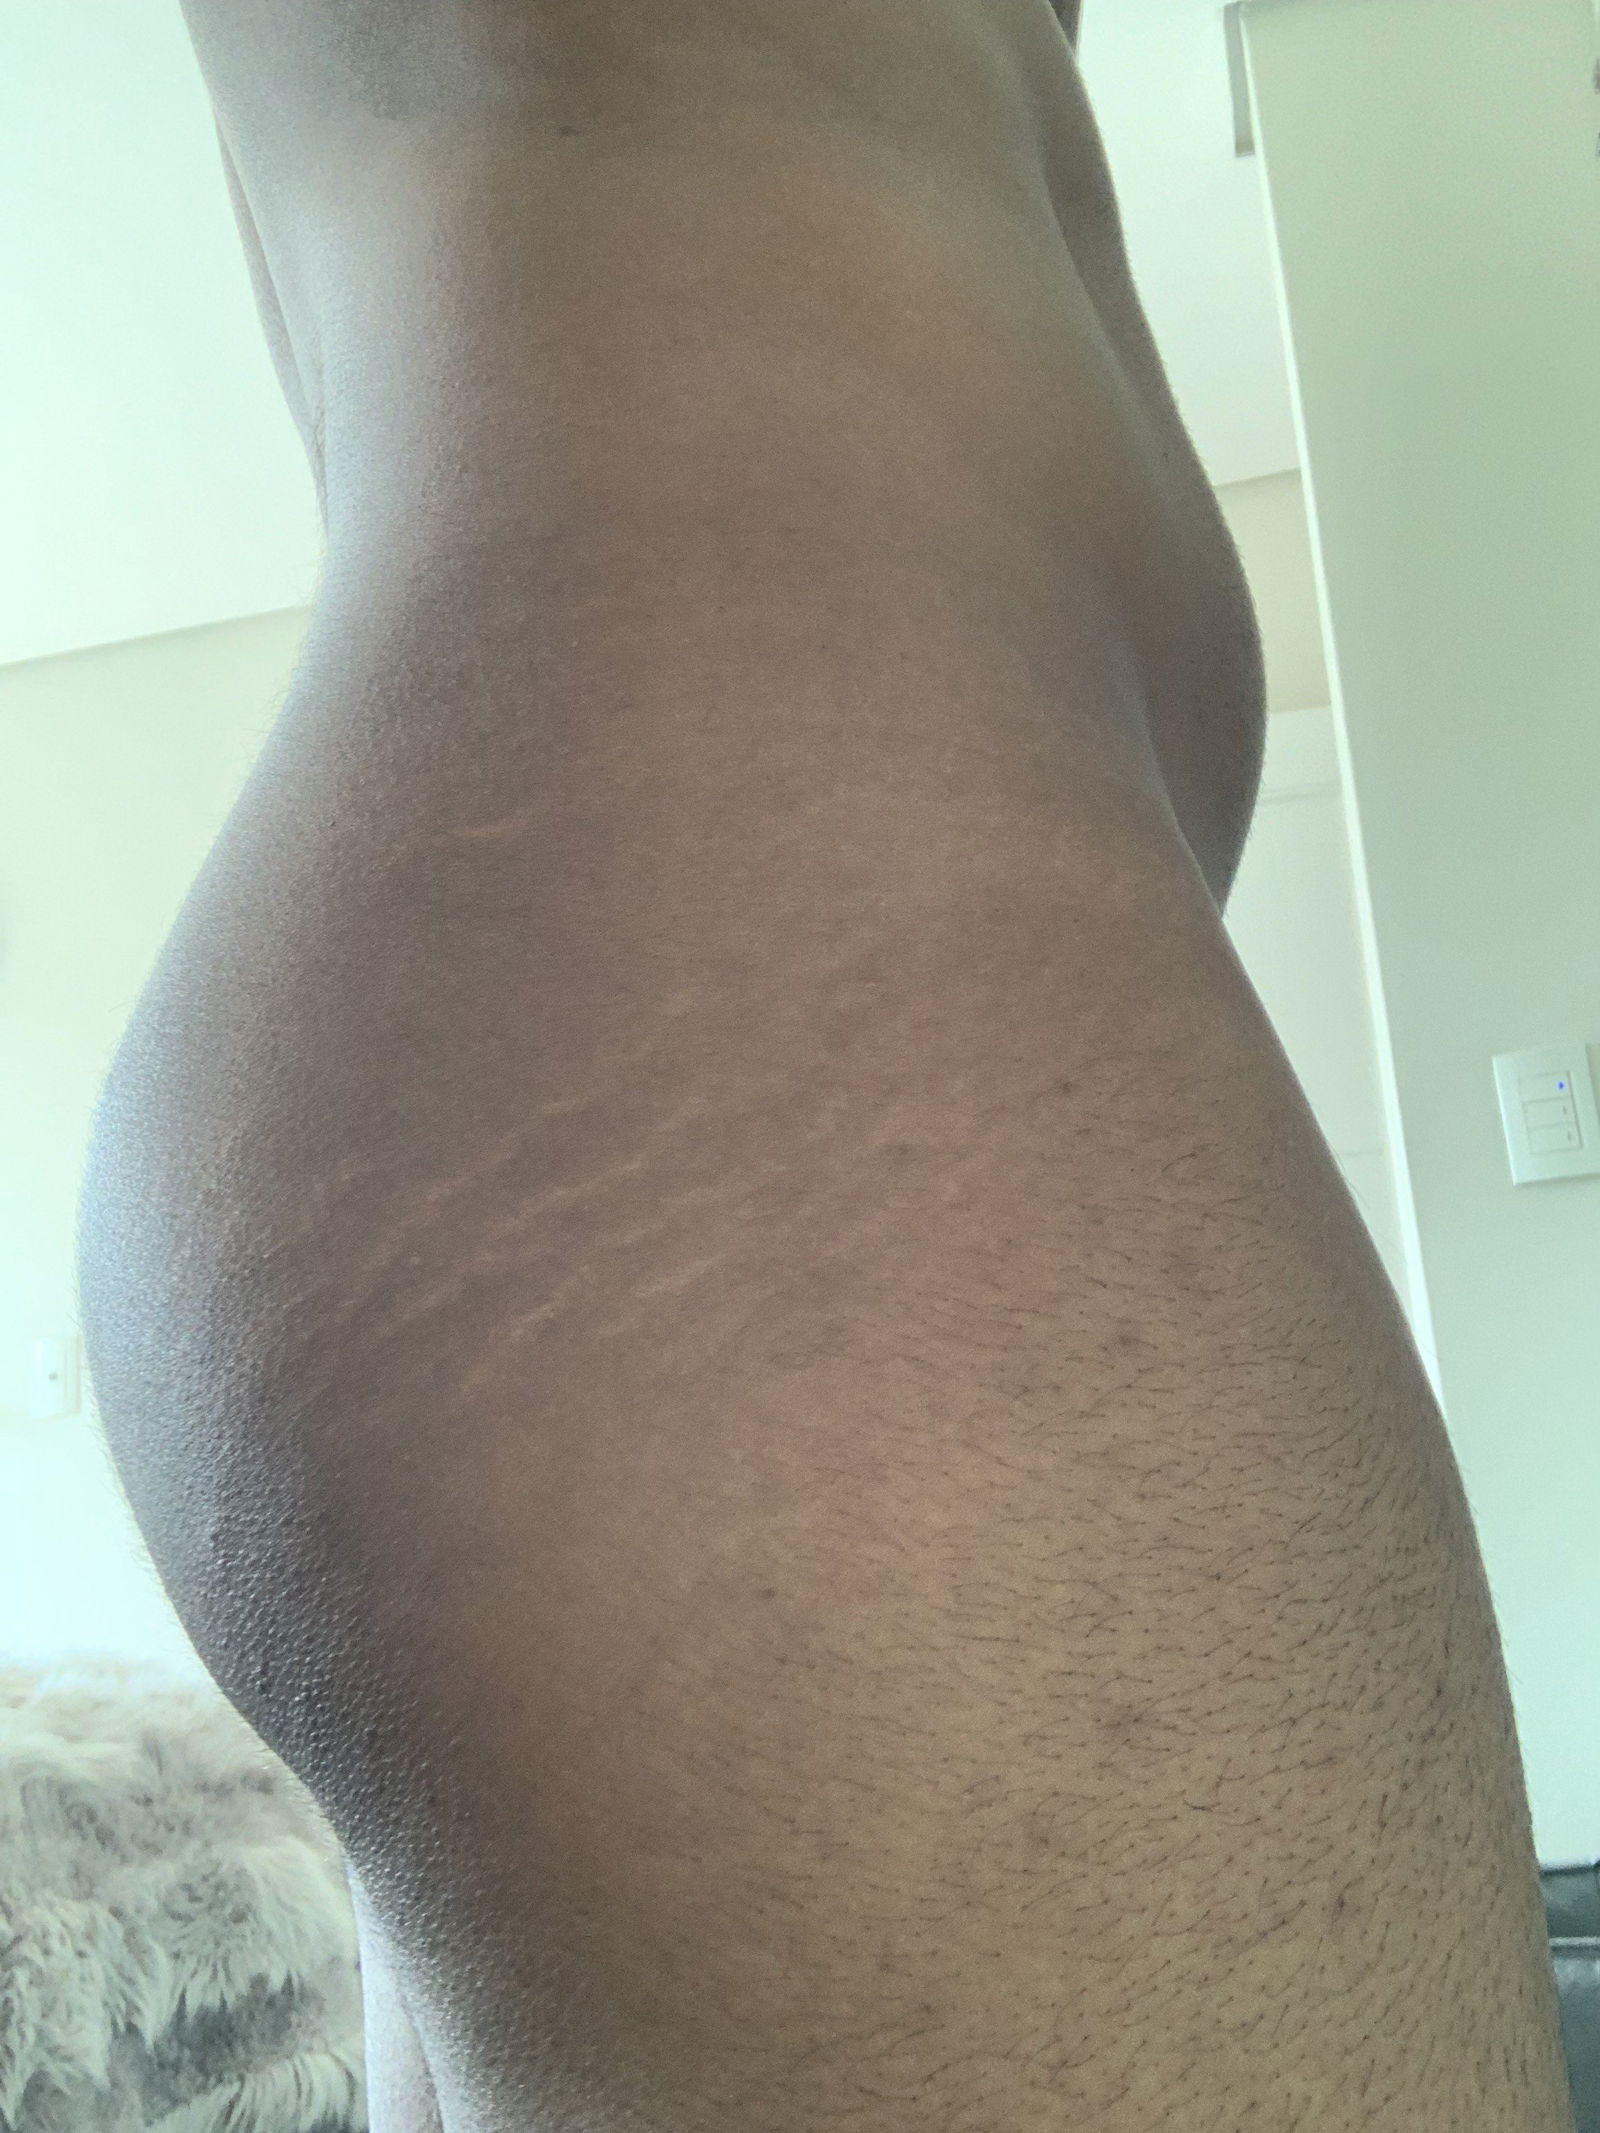 Photo by Josh with the username @011j,  June 8, 2023 at 7:37 AM. The post is about the topic Stretch Marks and the text says 'I love my stretch marks💙

#stretchmarks #straightmen #bodypositive'